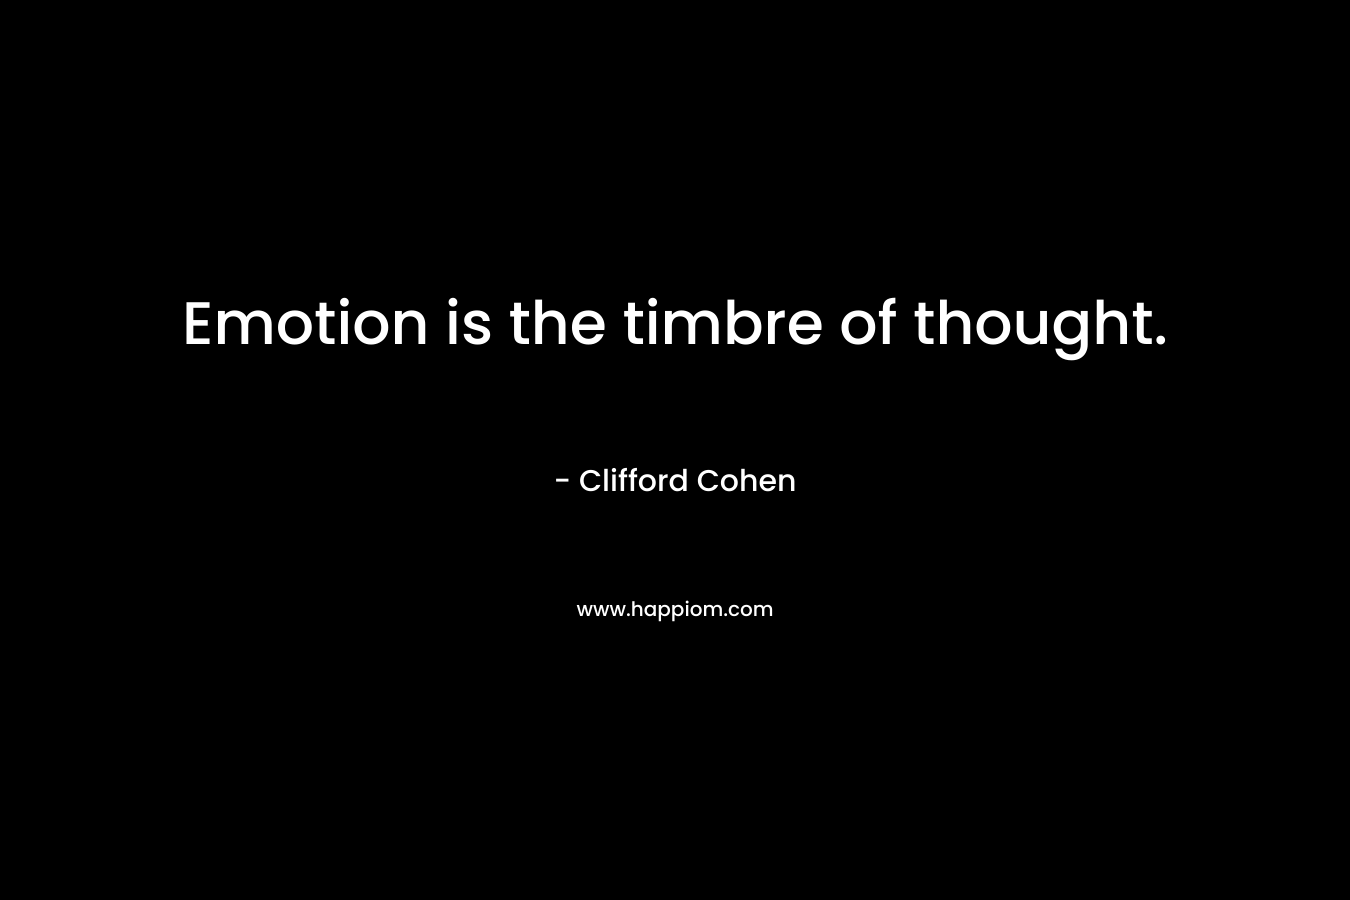 Emotion is the timbre of thought. – Clifford Cohen